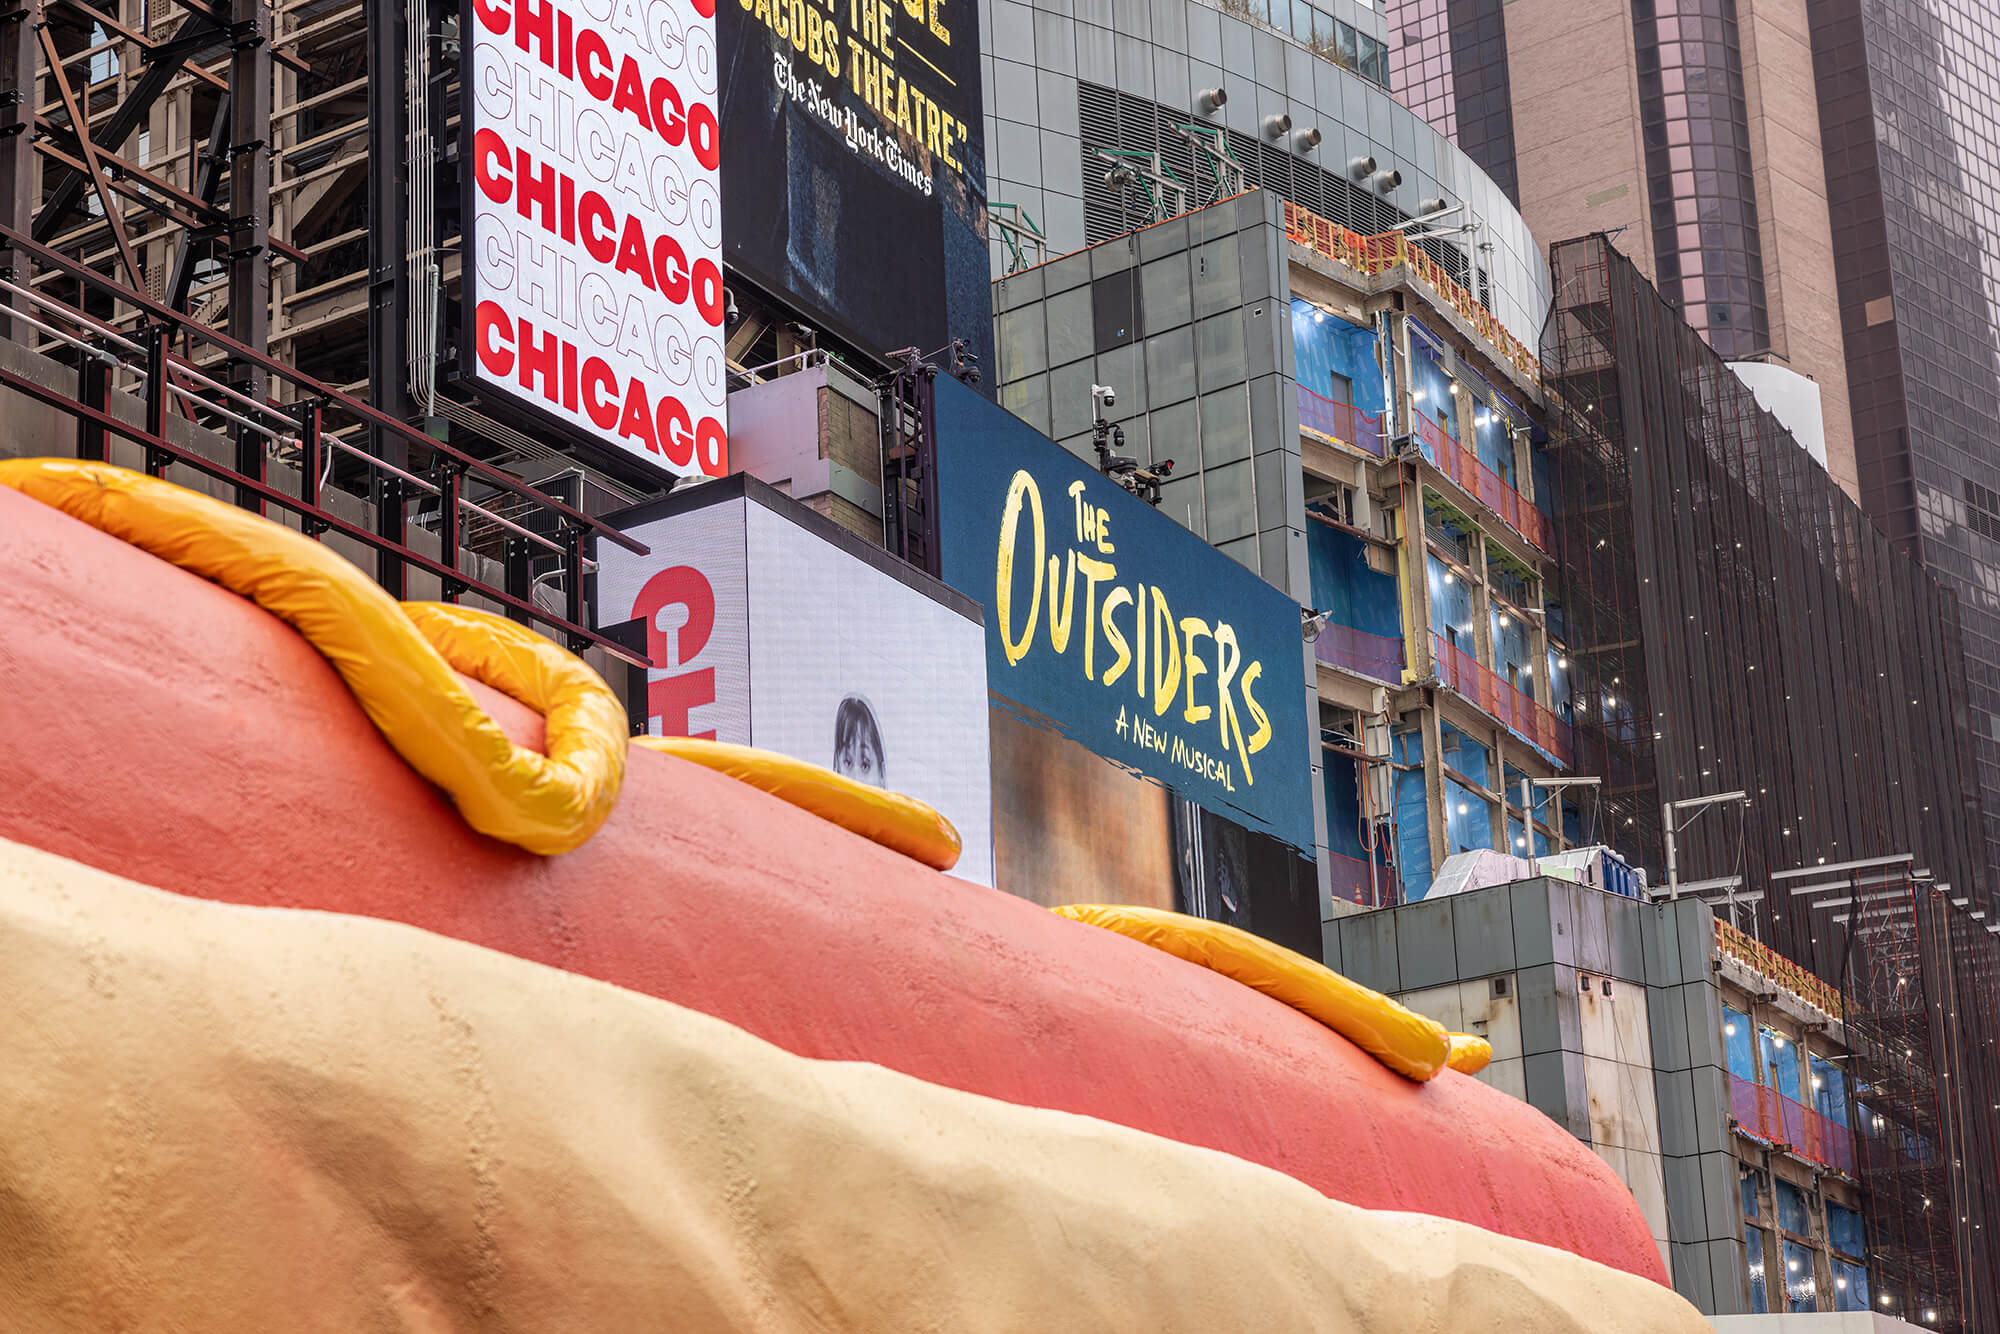 mustard dripping off Hot Dog in the City